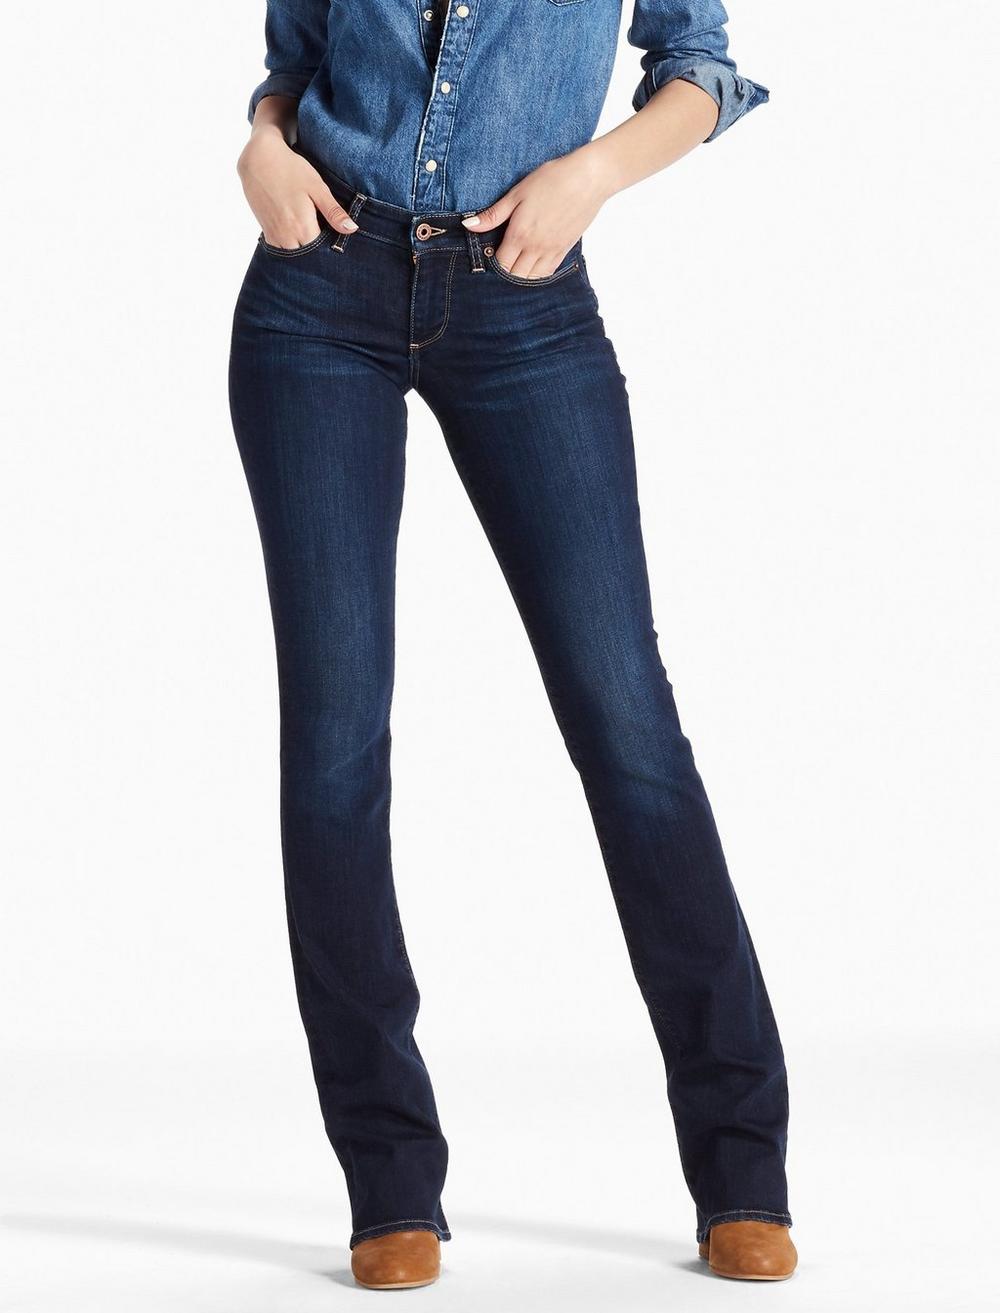 SWEET MID RISE BOOT JEAN, image 1